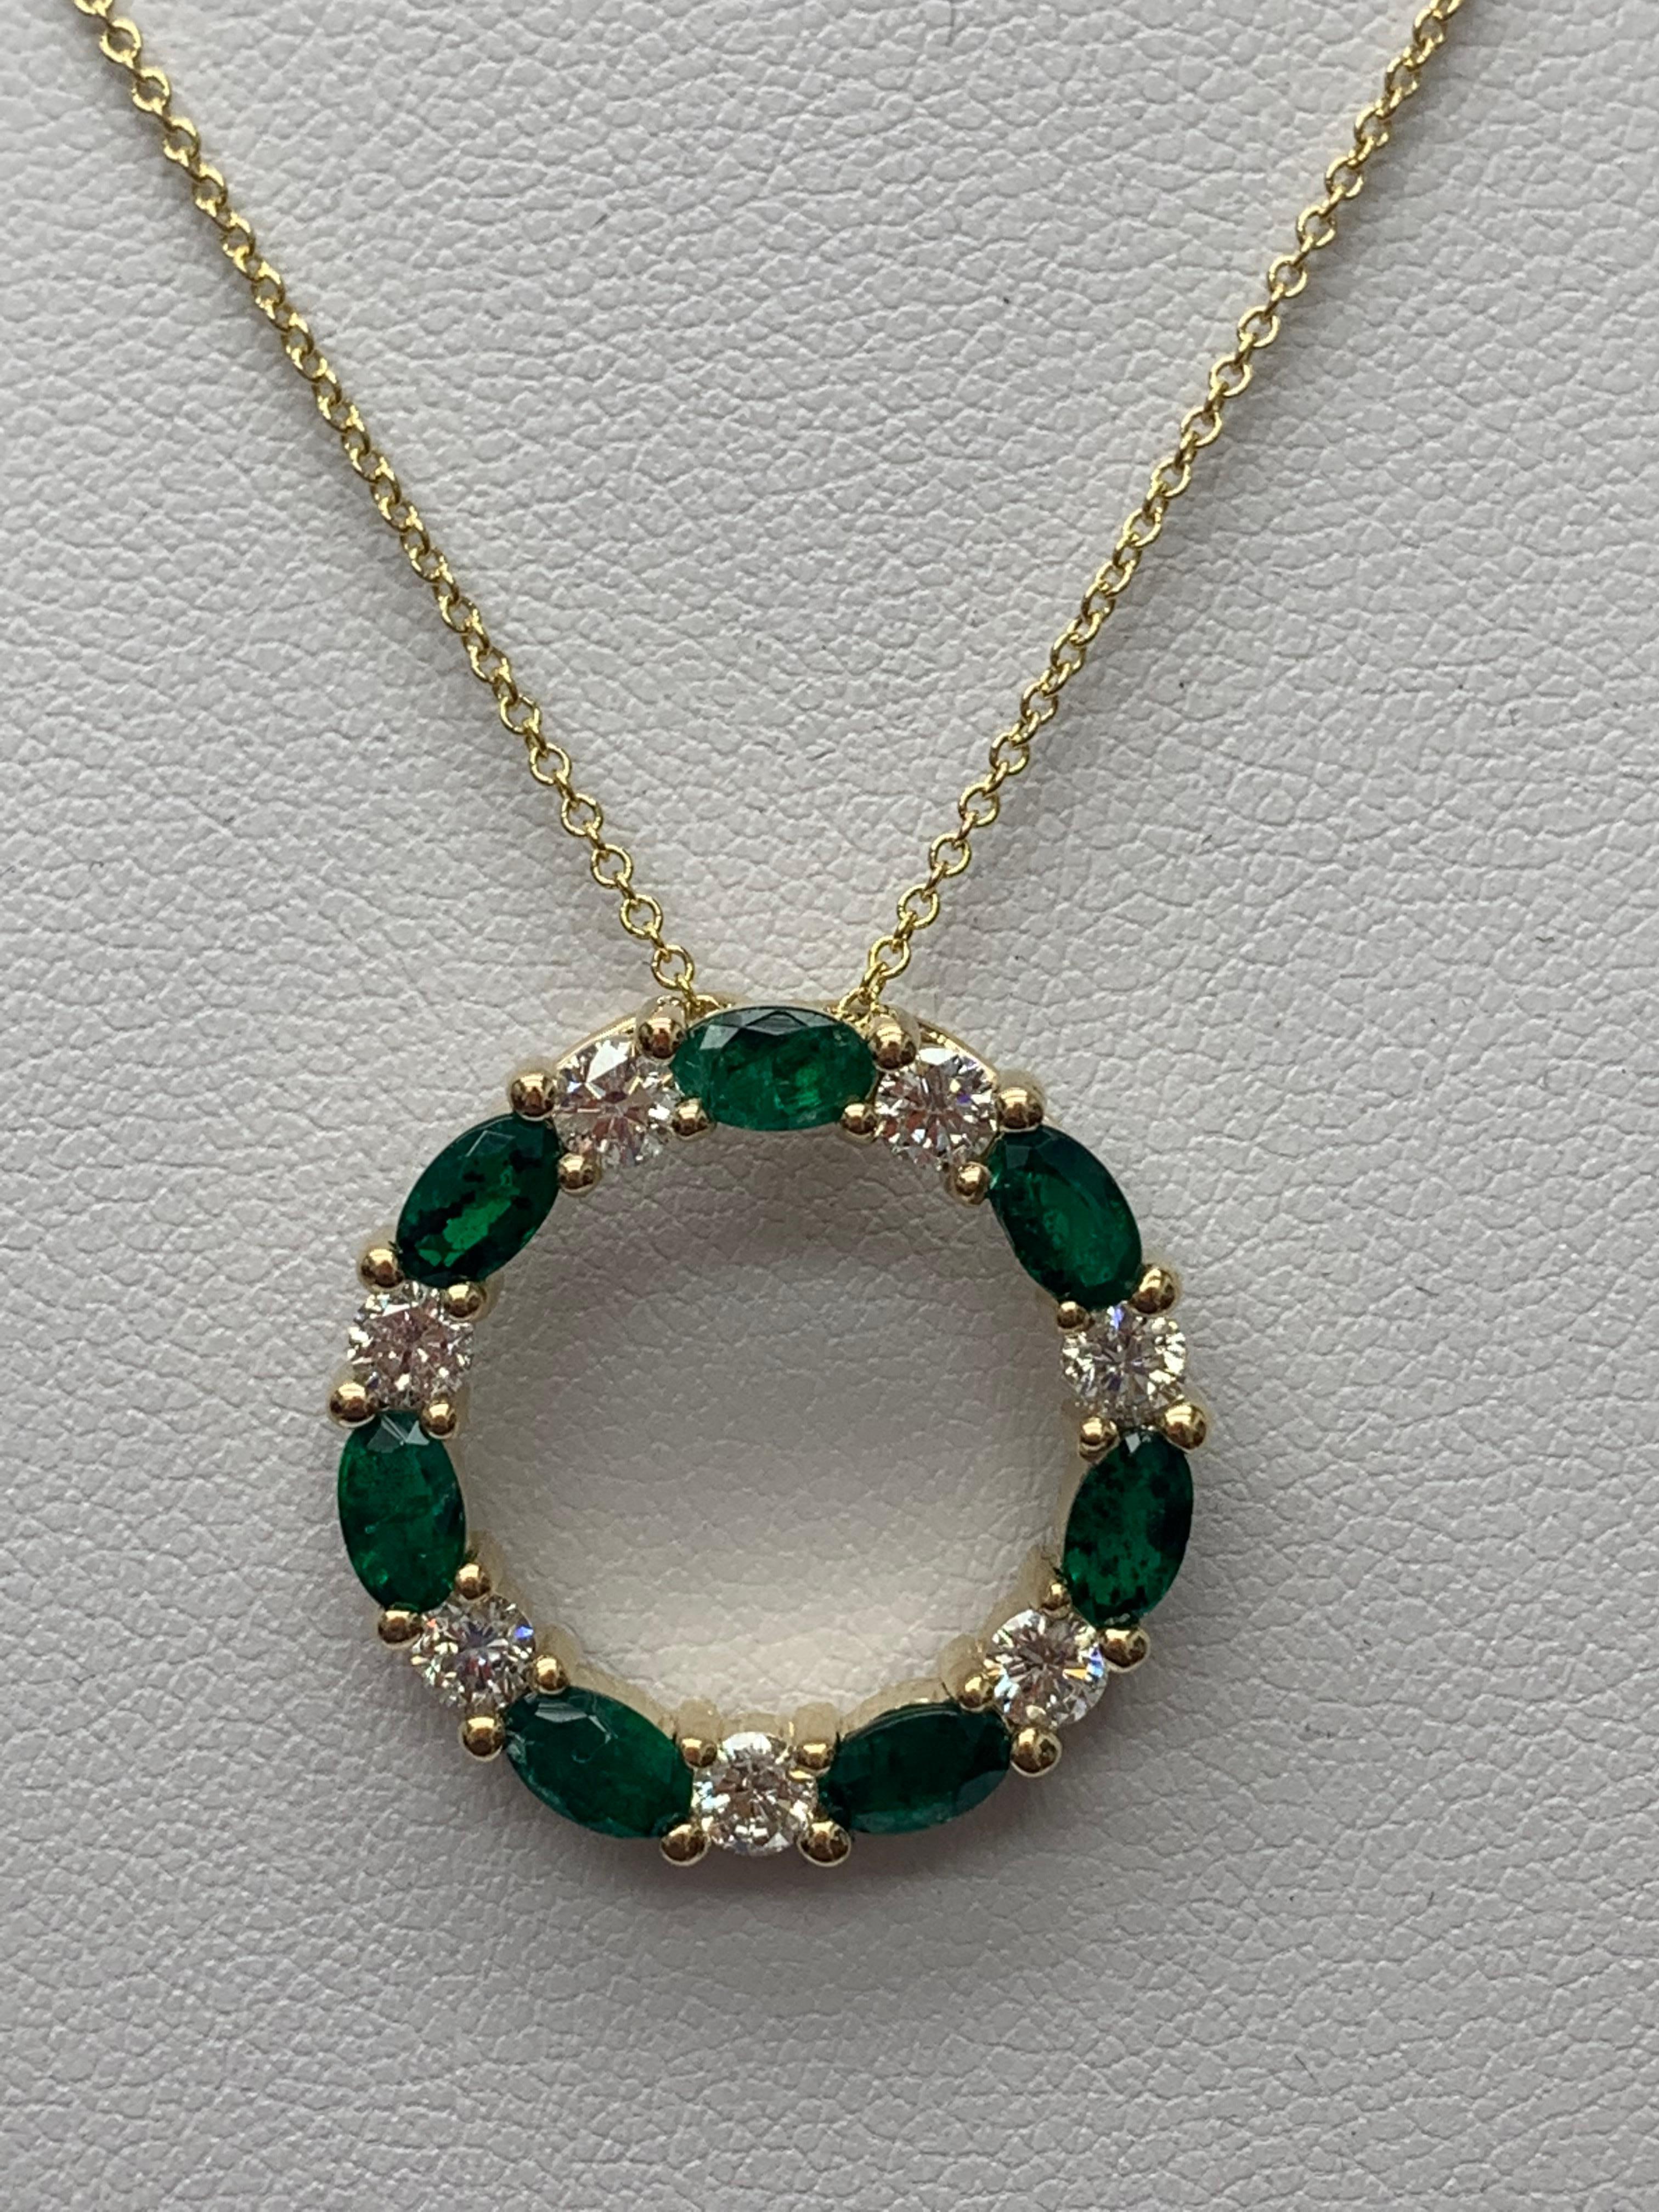 A stylish pendant necklace showcasing a row of Emerald alternating diamonds, set in an open-work, circular design. 7 oval shape emeralds weigh 1.65 carats and 7 brilliant-cut diamonds weigh 0.71 carats in total. All diamonds are GH color SI1